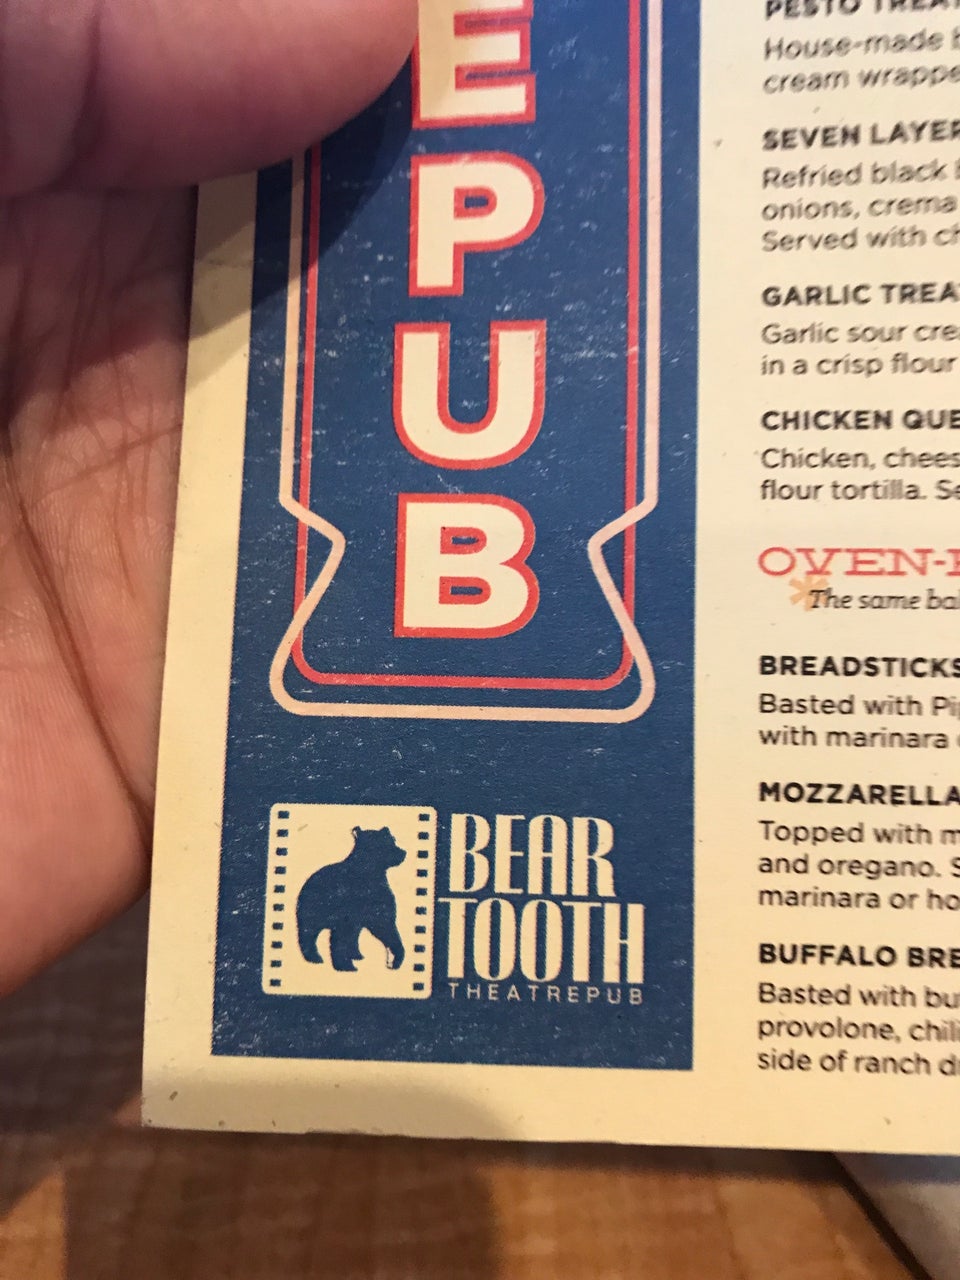 Photo of Bear Tooth Theatrepub Cafe & Grill